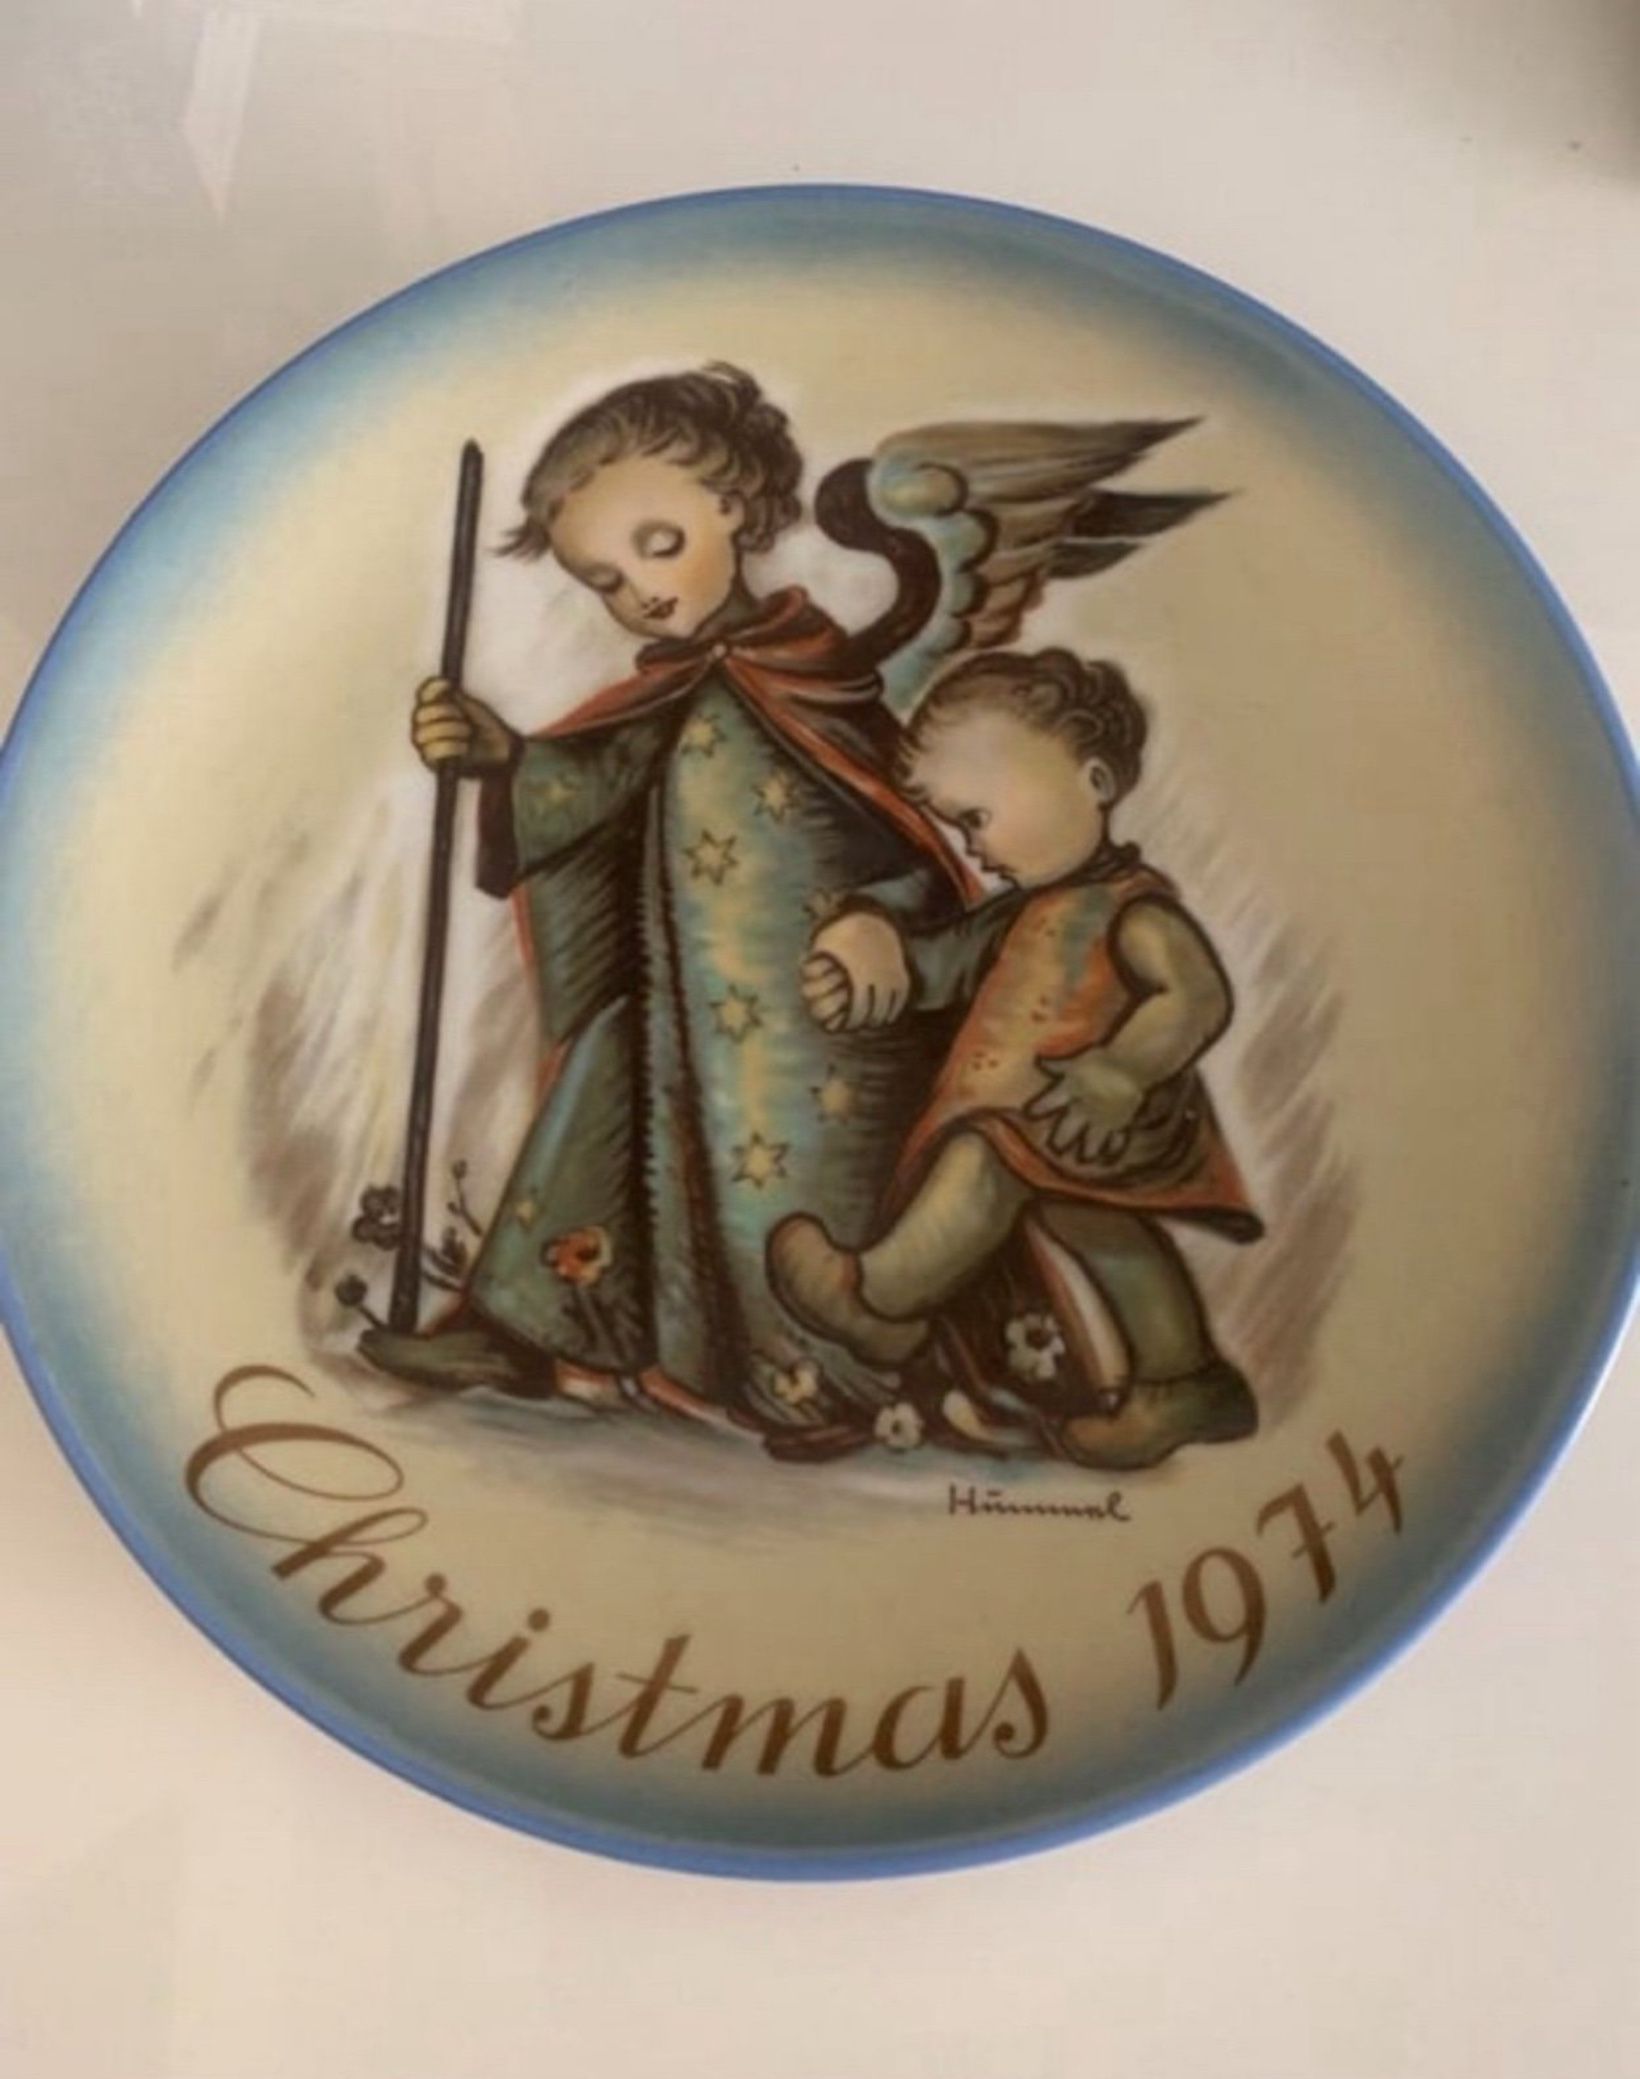 1974 Limited Edition Hummel Collector Christmas Plate